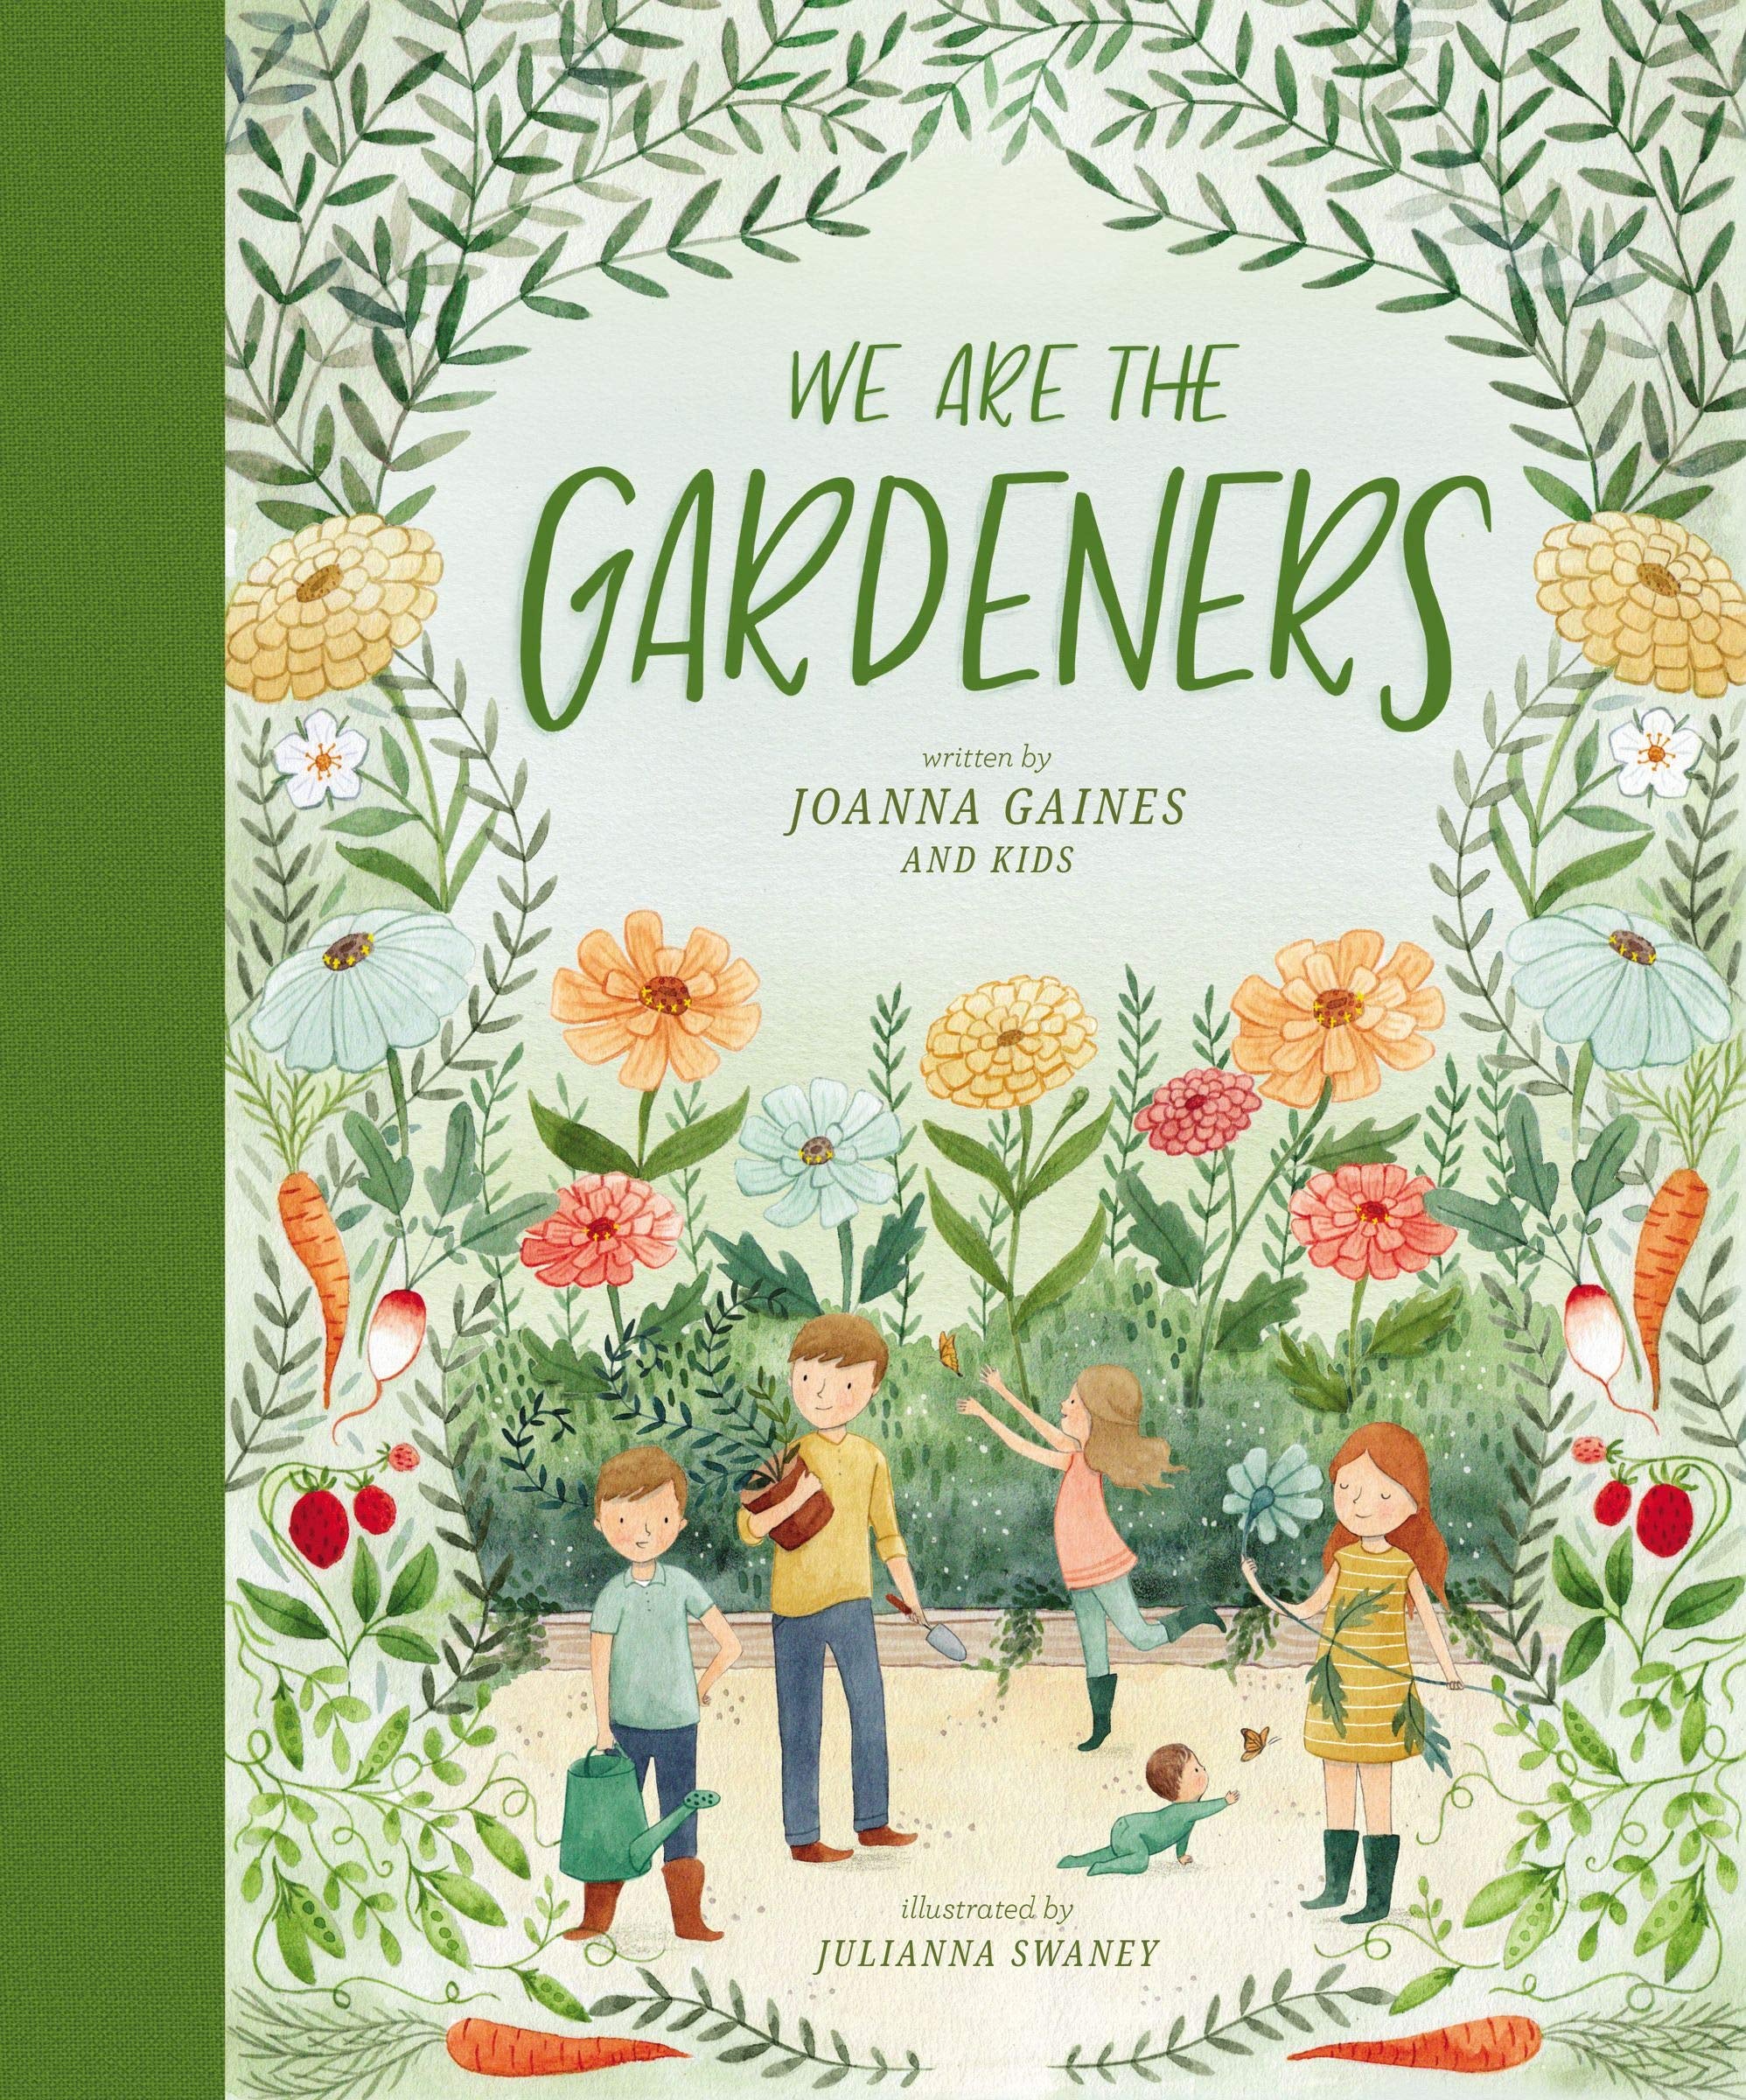 We Are Gardeners by Joanna Gaines